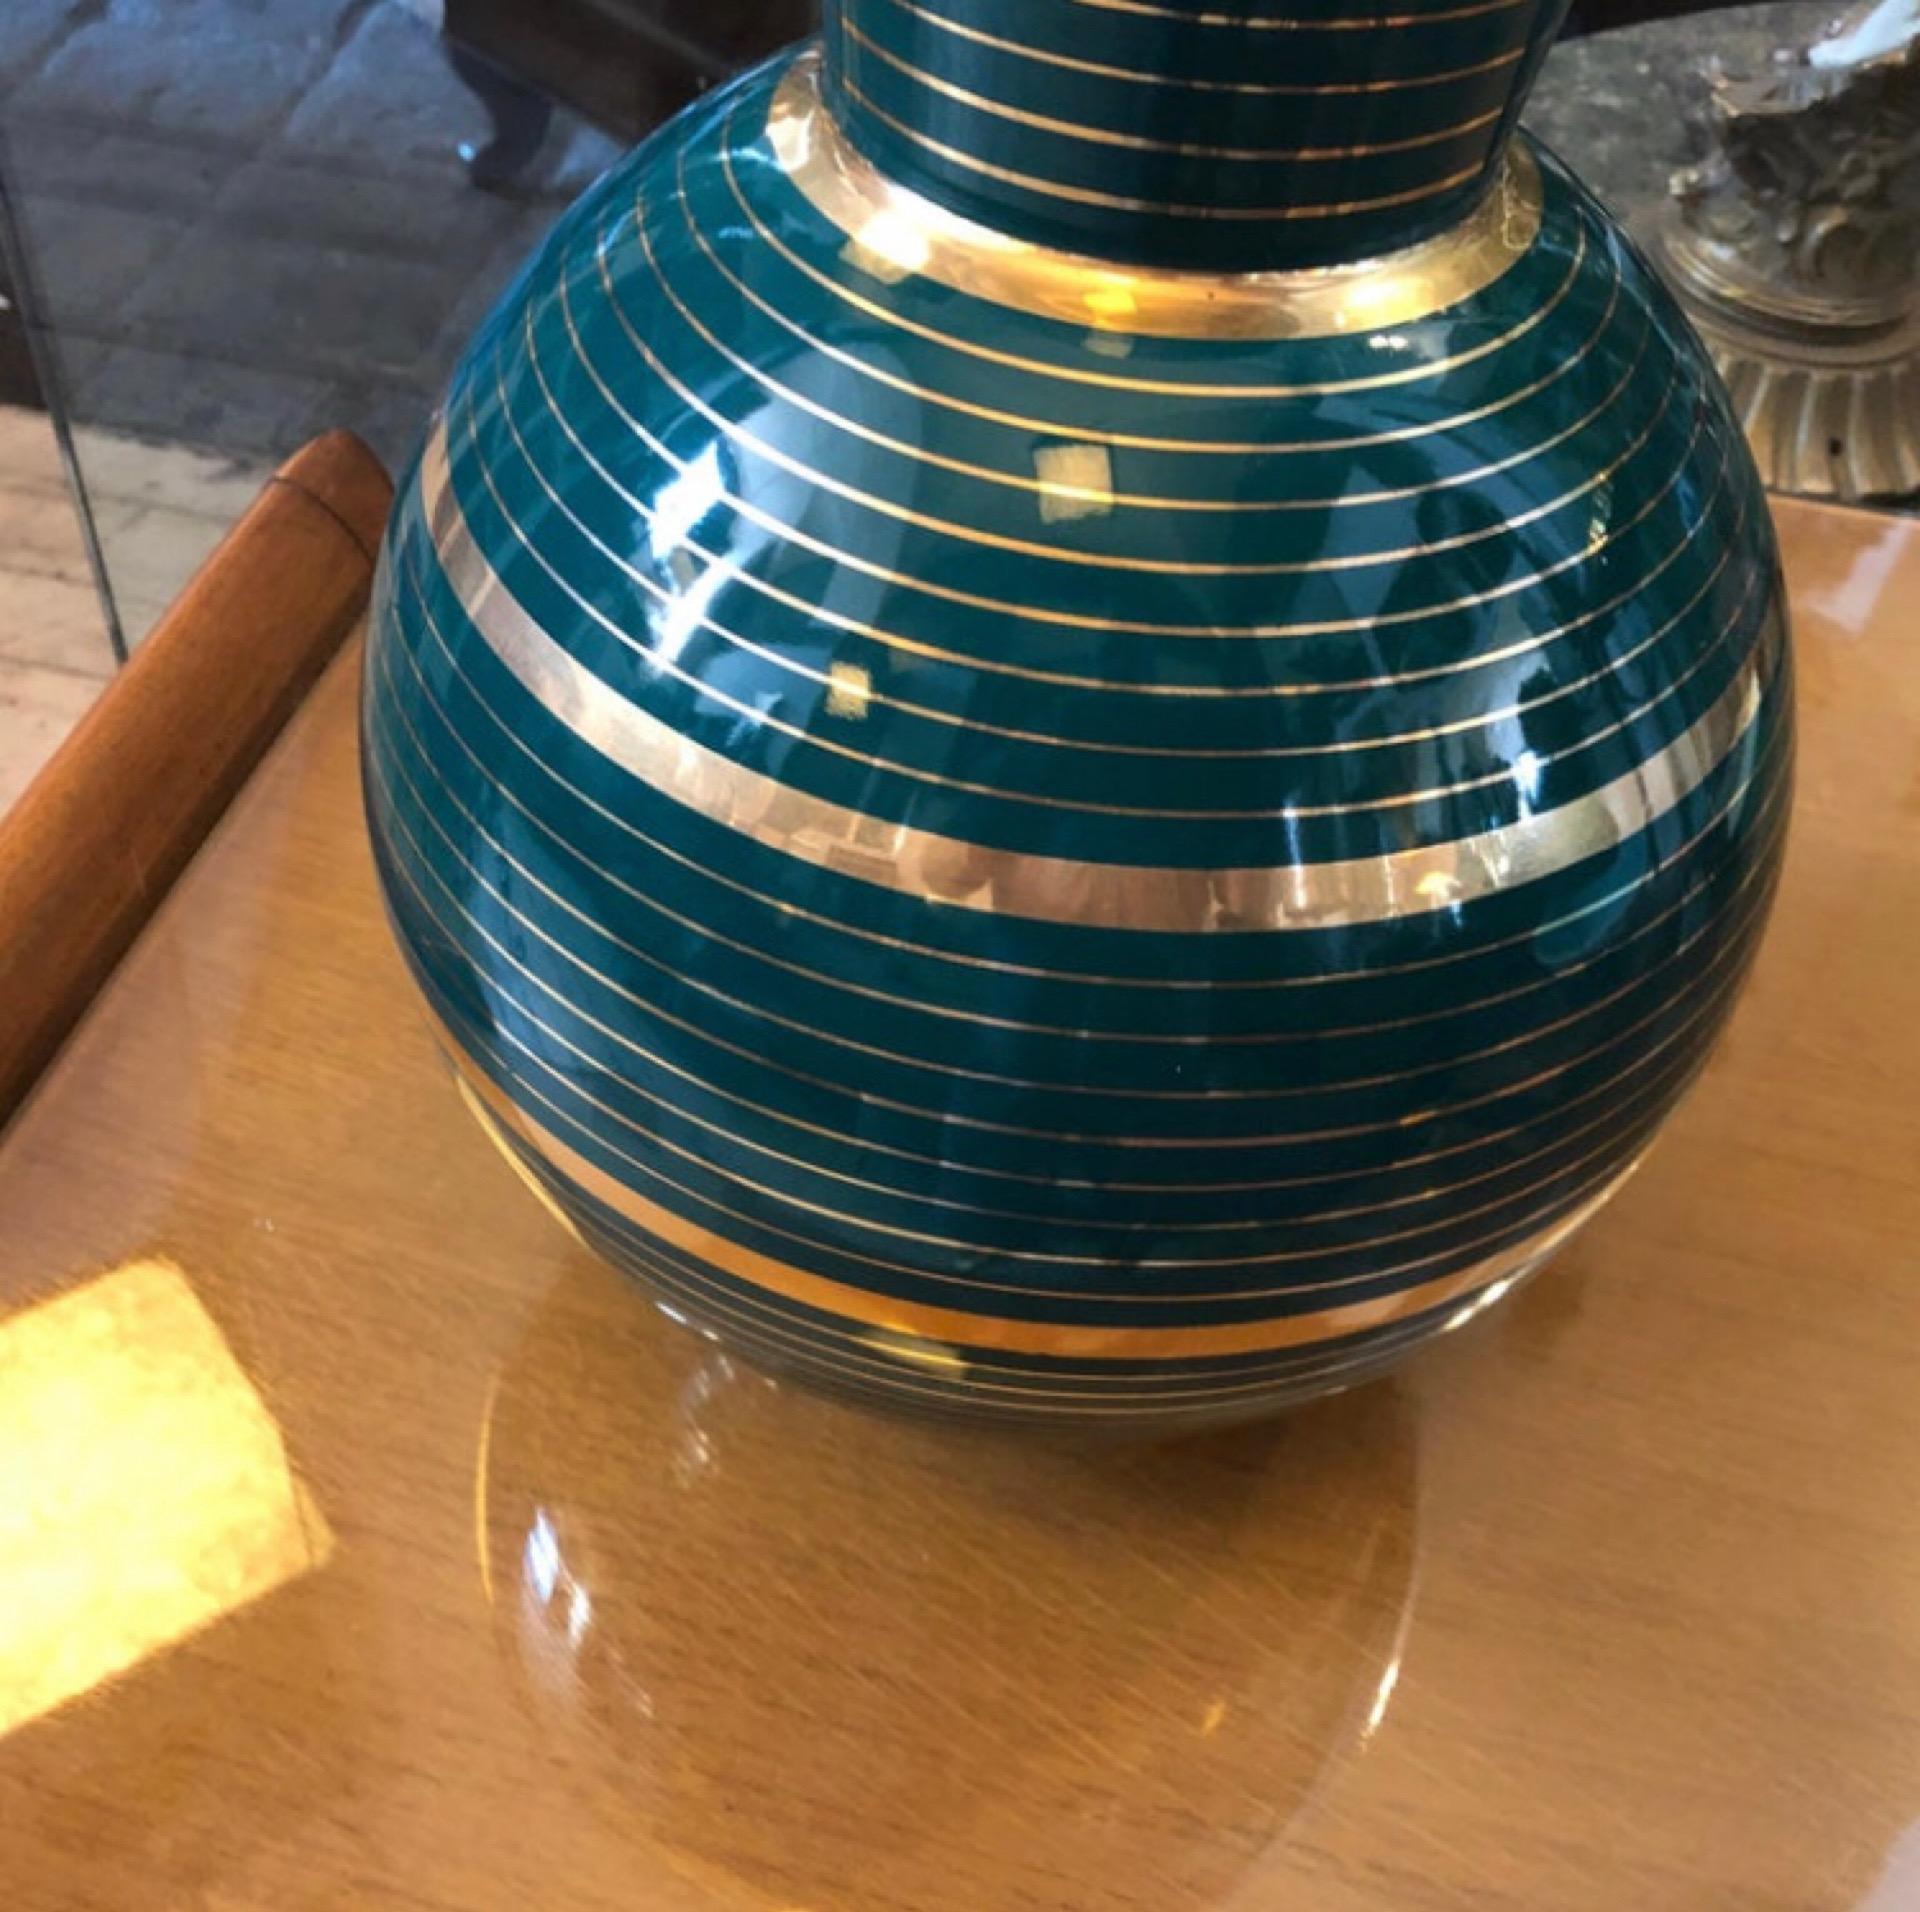 Stylish green and gold ceramic vase designed and manufactured in Sesto Fiorentino small town in Tuscany, world famous for hand painted ceramics. It's signed A.A.C.A. on the bottom.